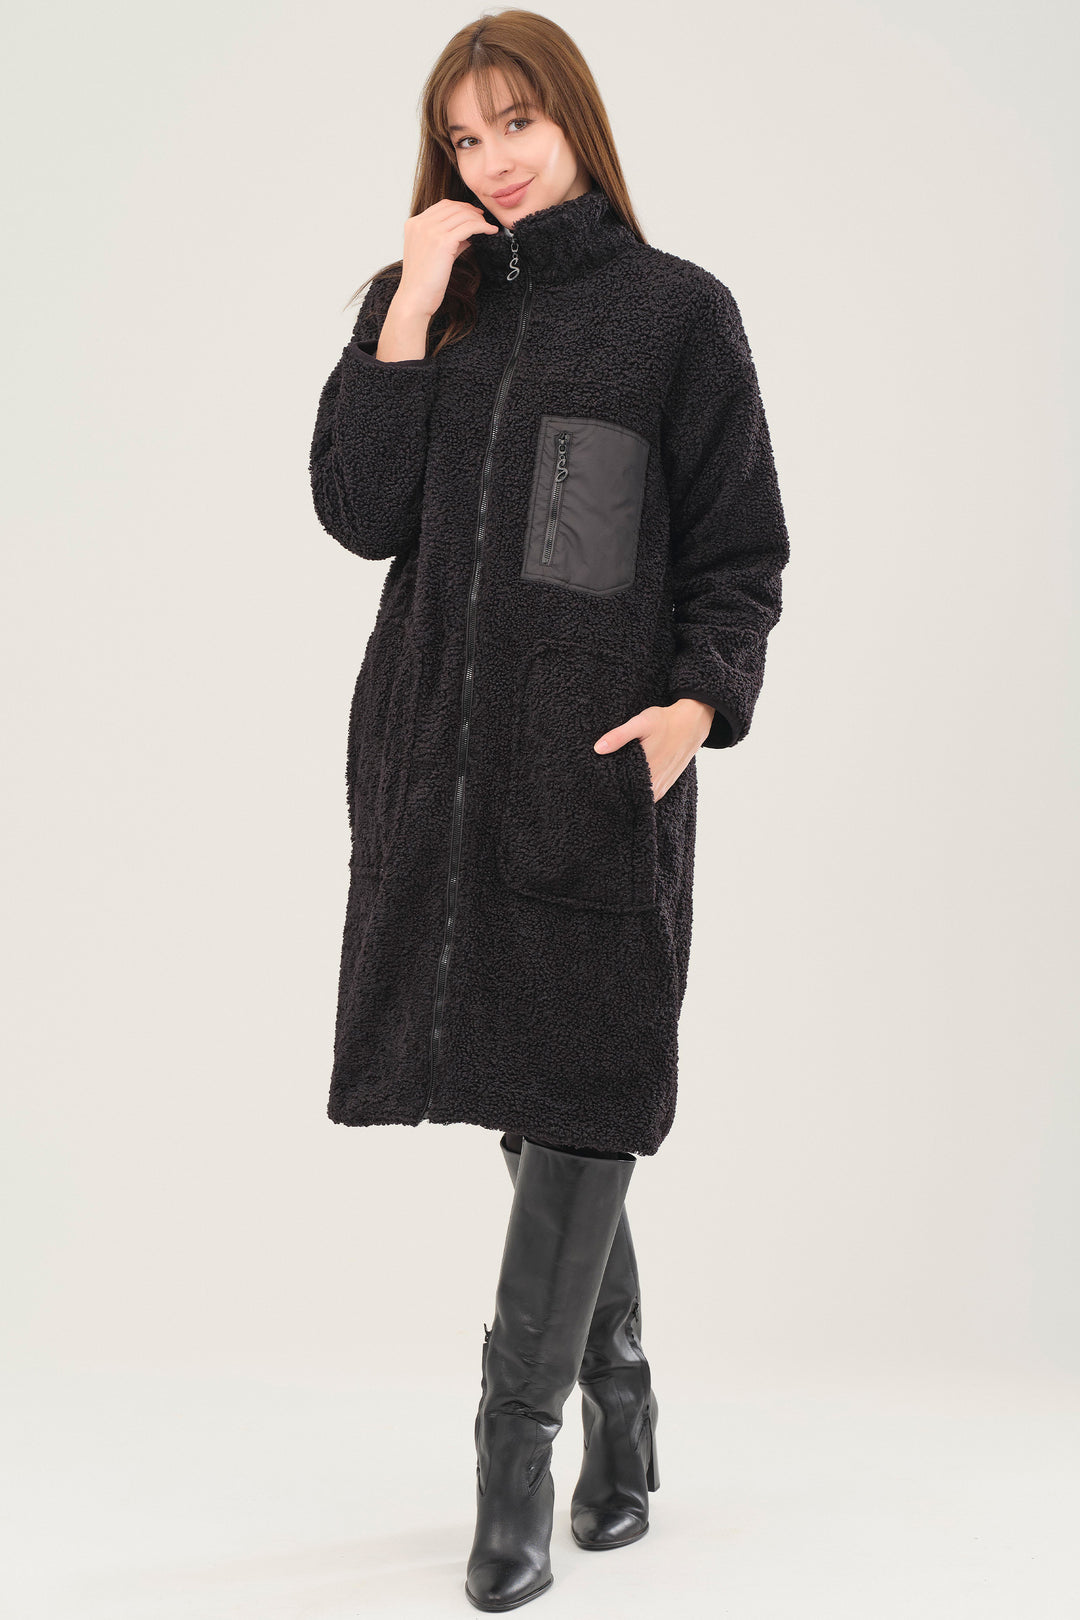 This Sherpa Zip Long Coat features a soft sherpa fabric, contrasting detail, large front pockets and a front zipper for an easy-wearing look.